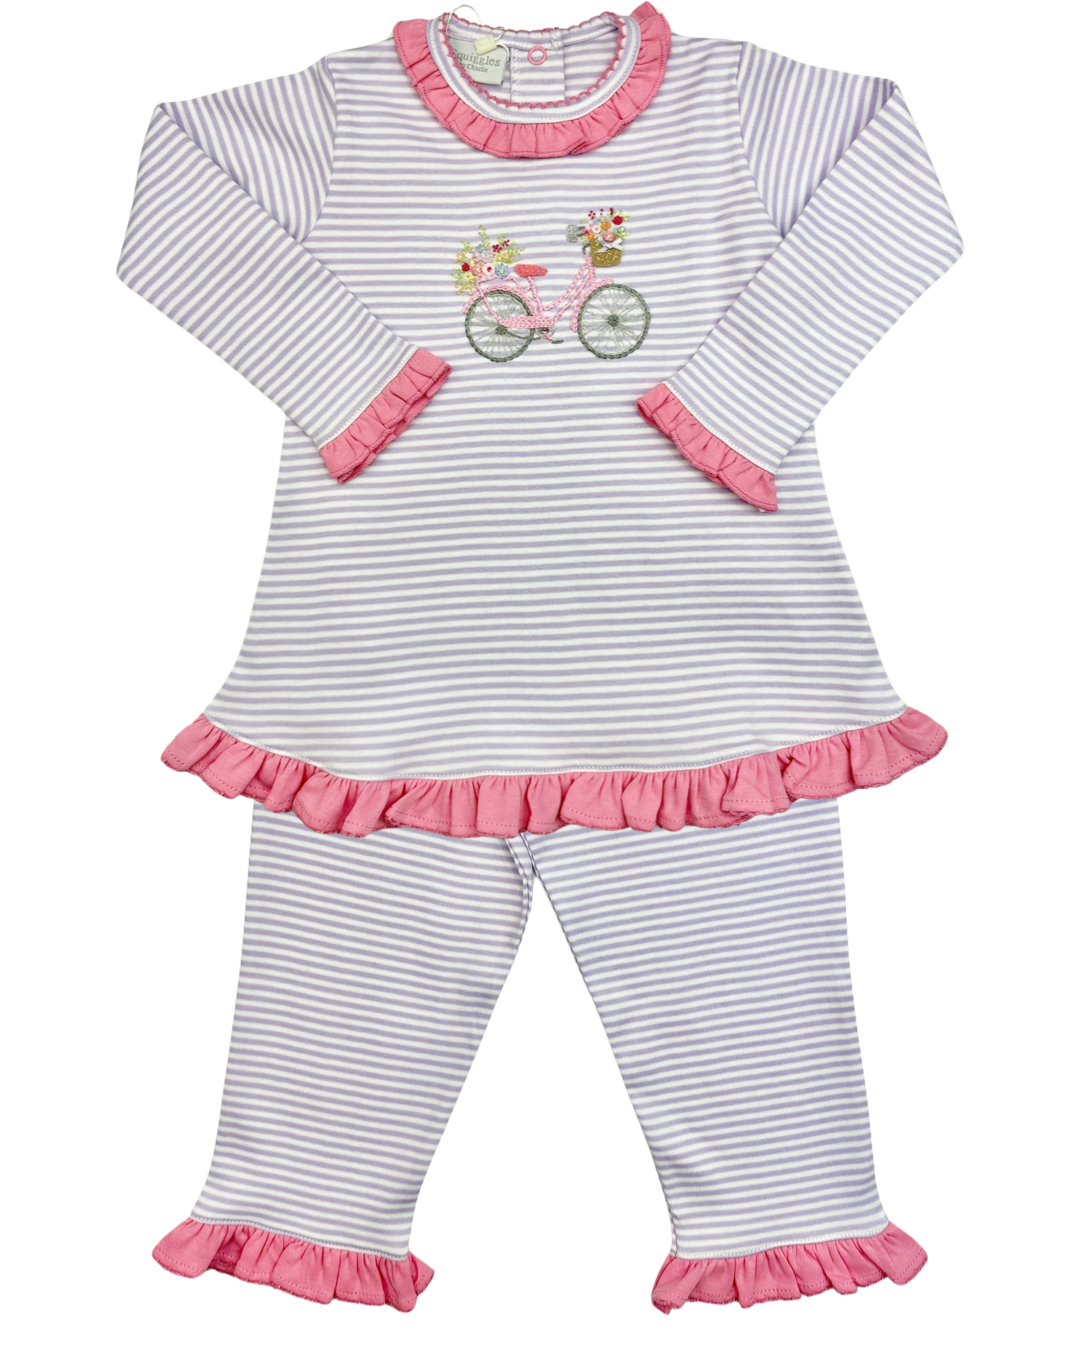 Bicycle & Flowers Ruffled Pant Set (2T,3T,4T)